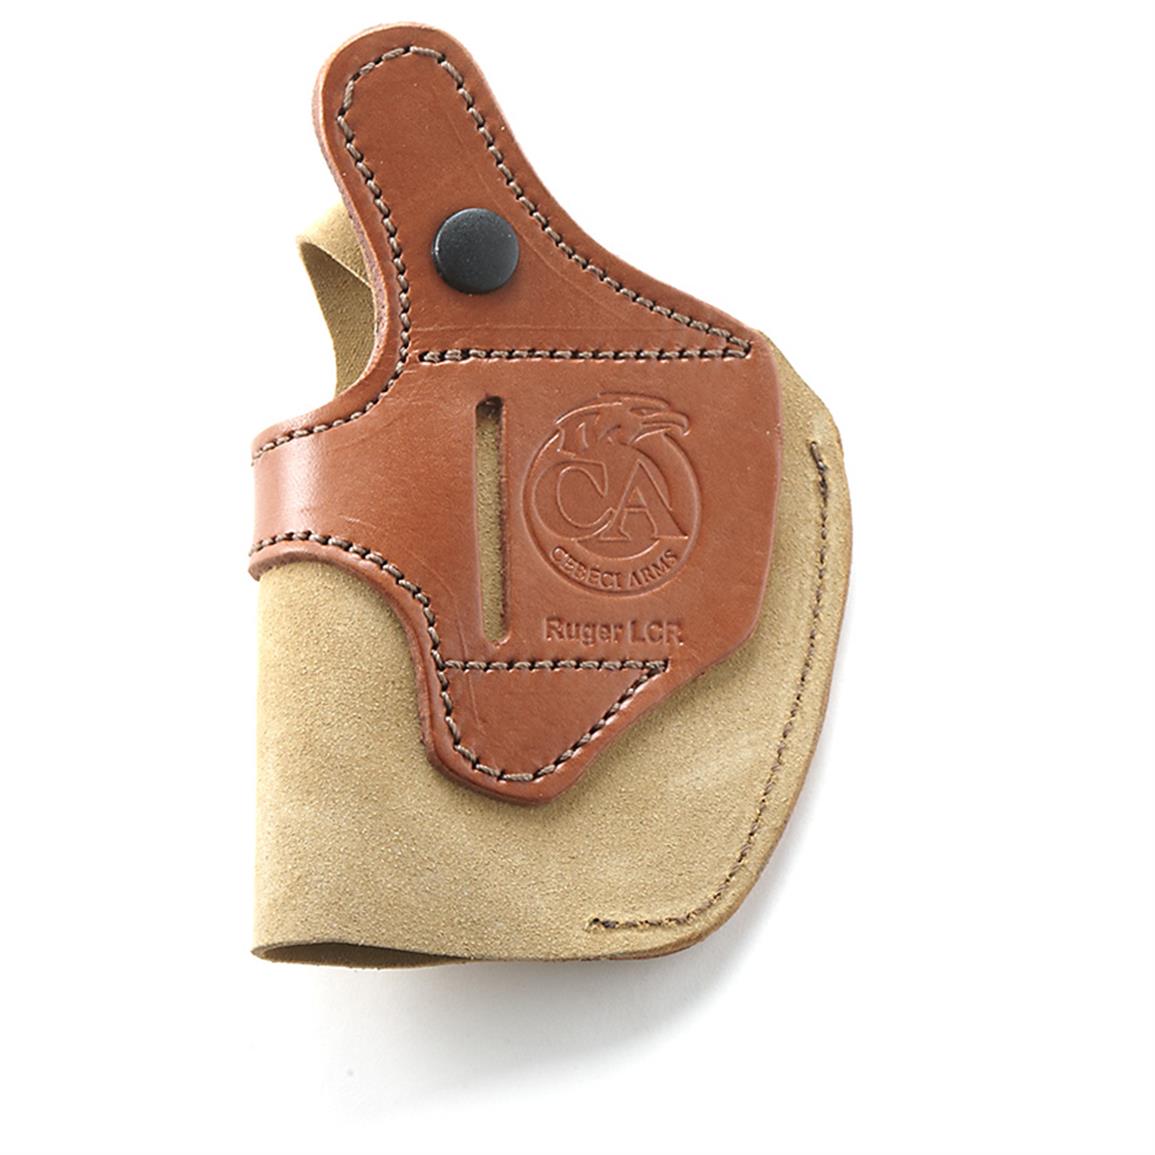 Cebeci Arms® Inside-the-Waistband Ruger® LCR Suede Leather Holster ...